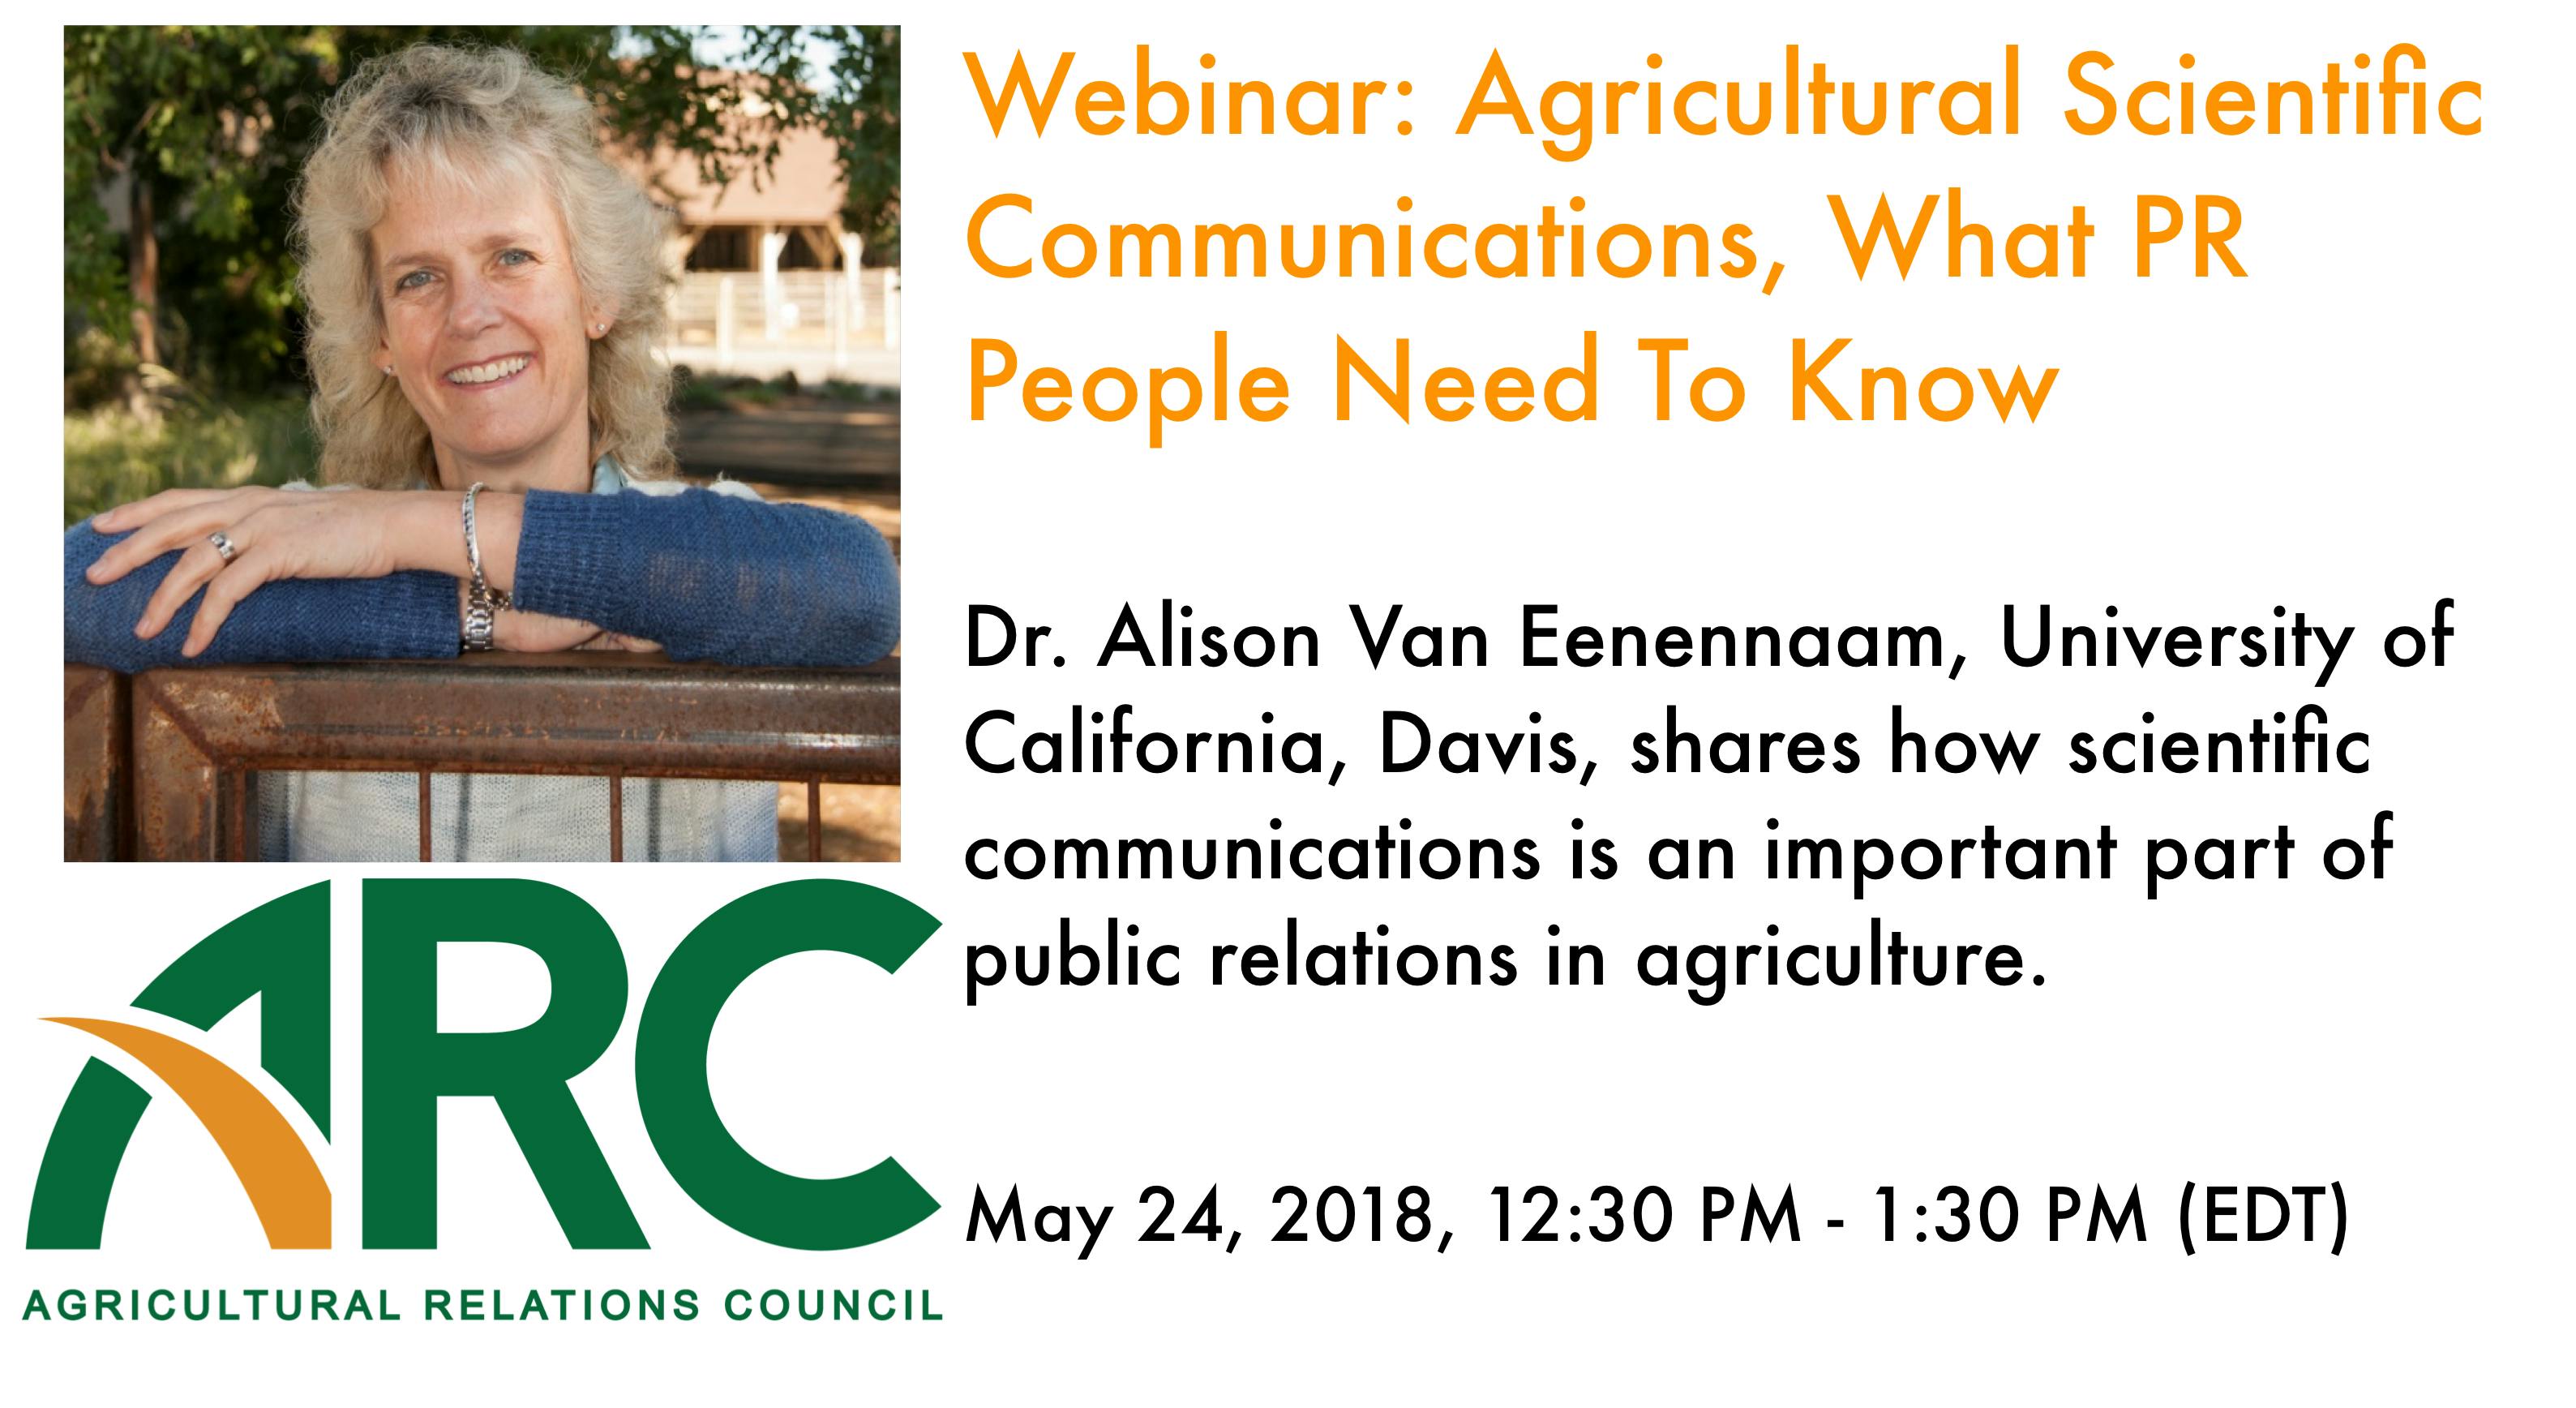 Webinar: Agricultural Scientific Communications, What PR People Need To Know